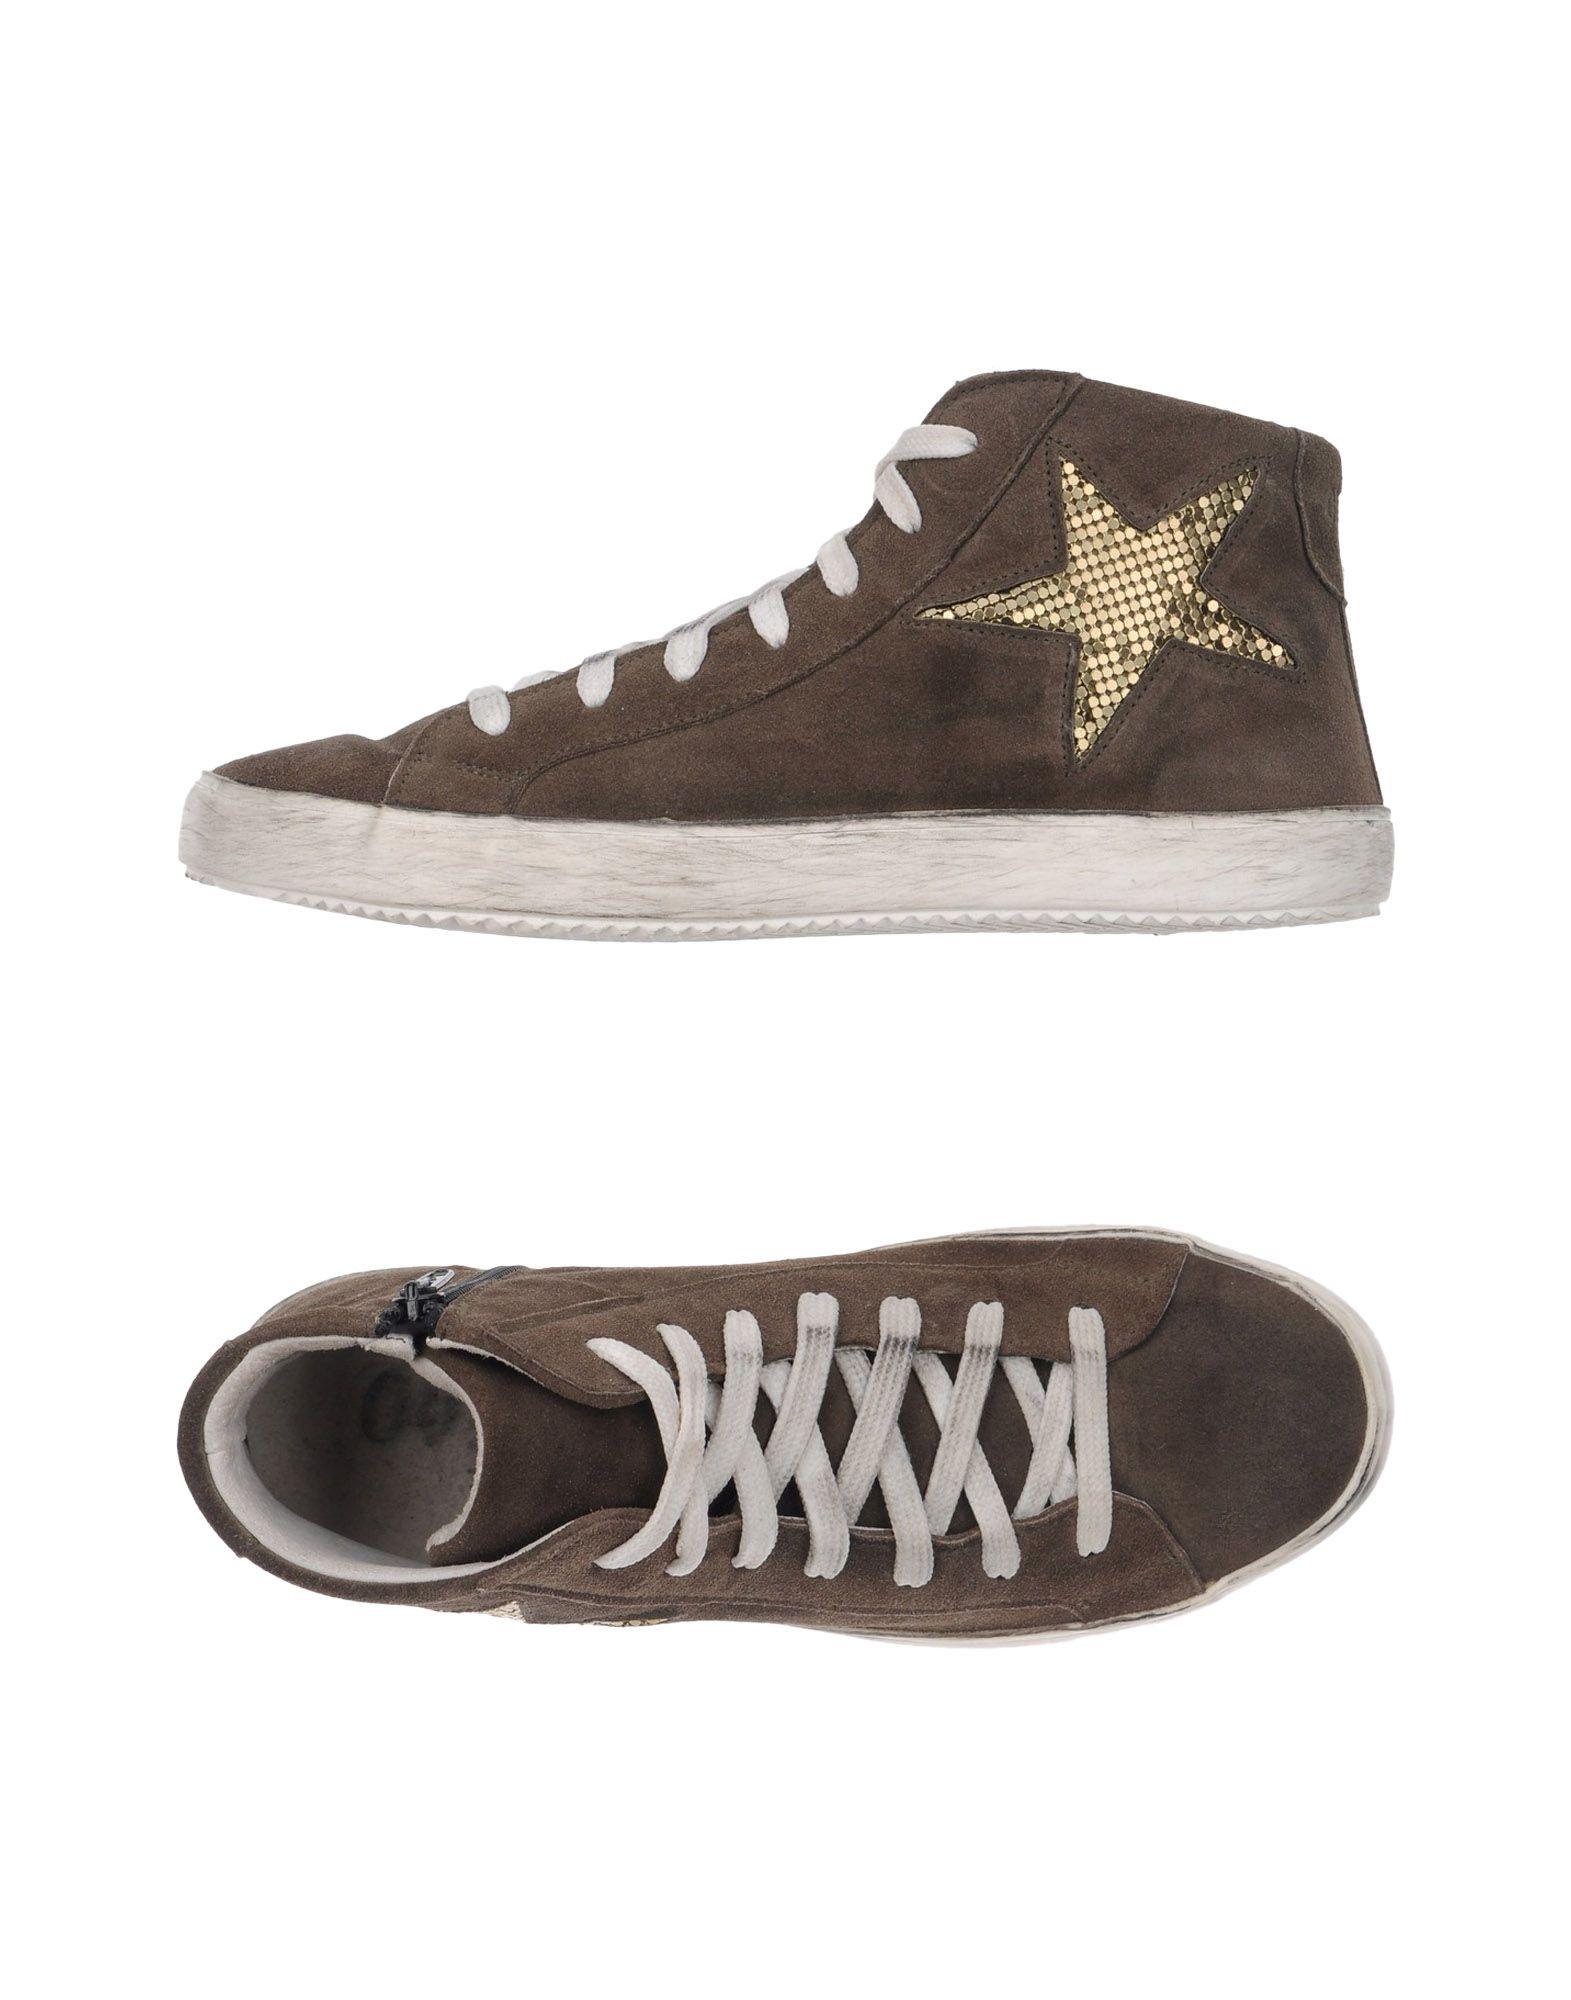 Lyst - Ovye' by cristina lucchi High-tops & Sneakers in Natural for Men